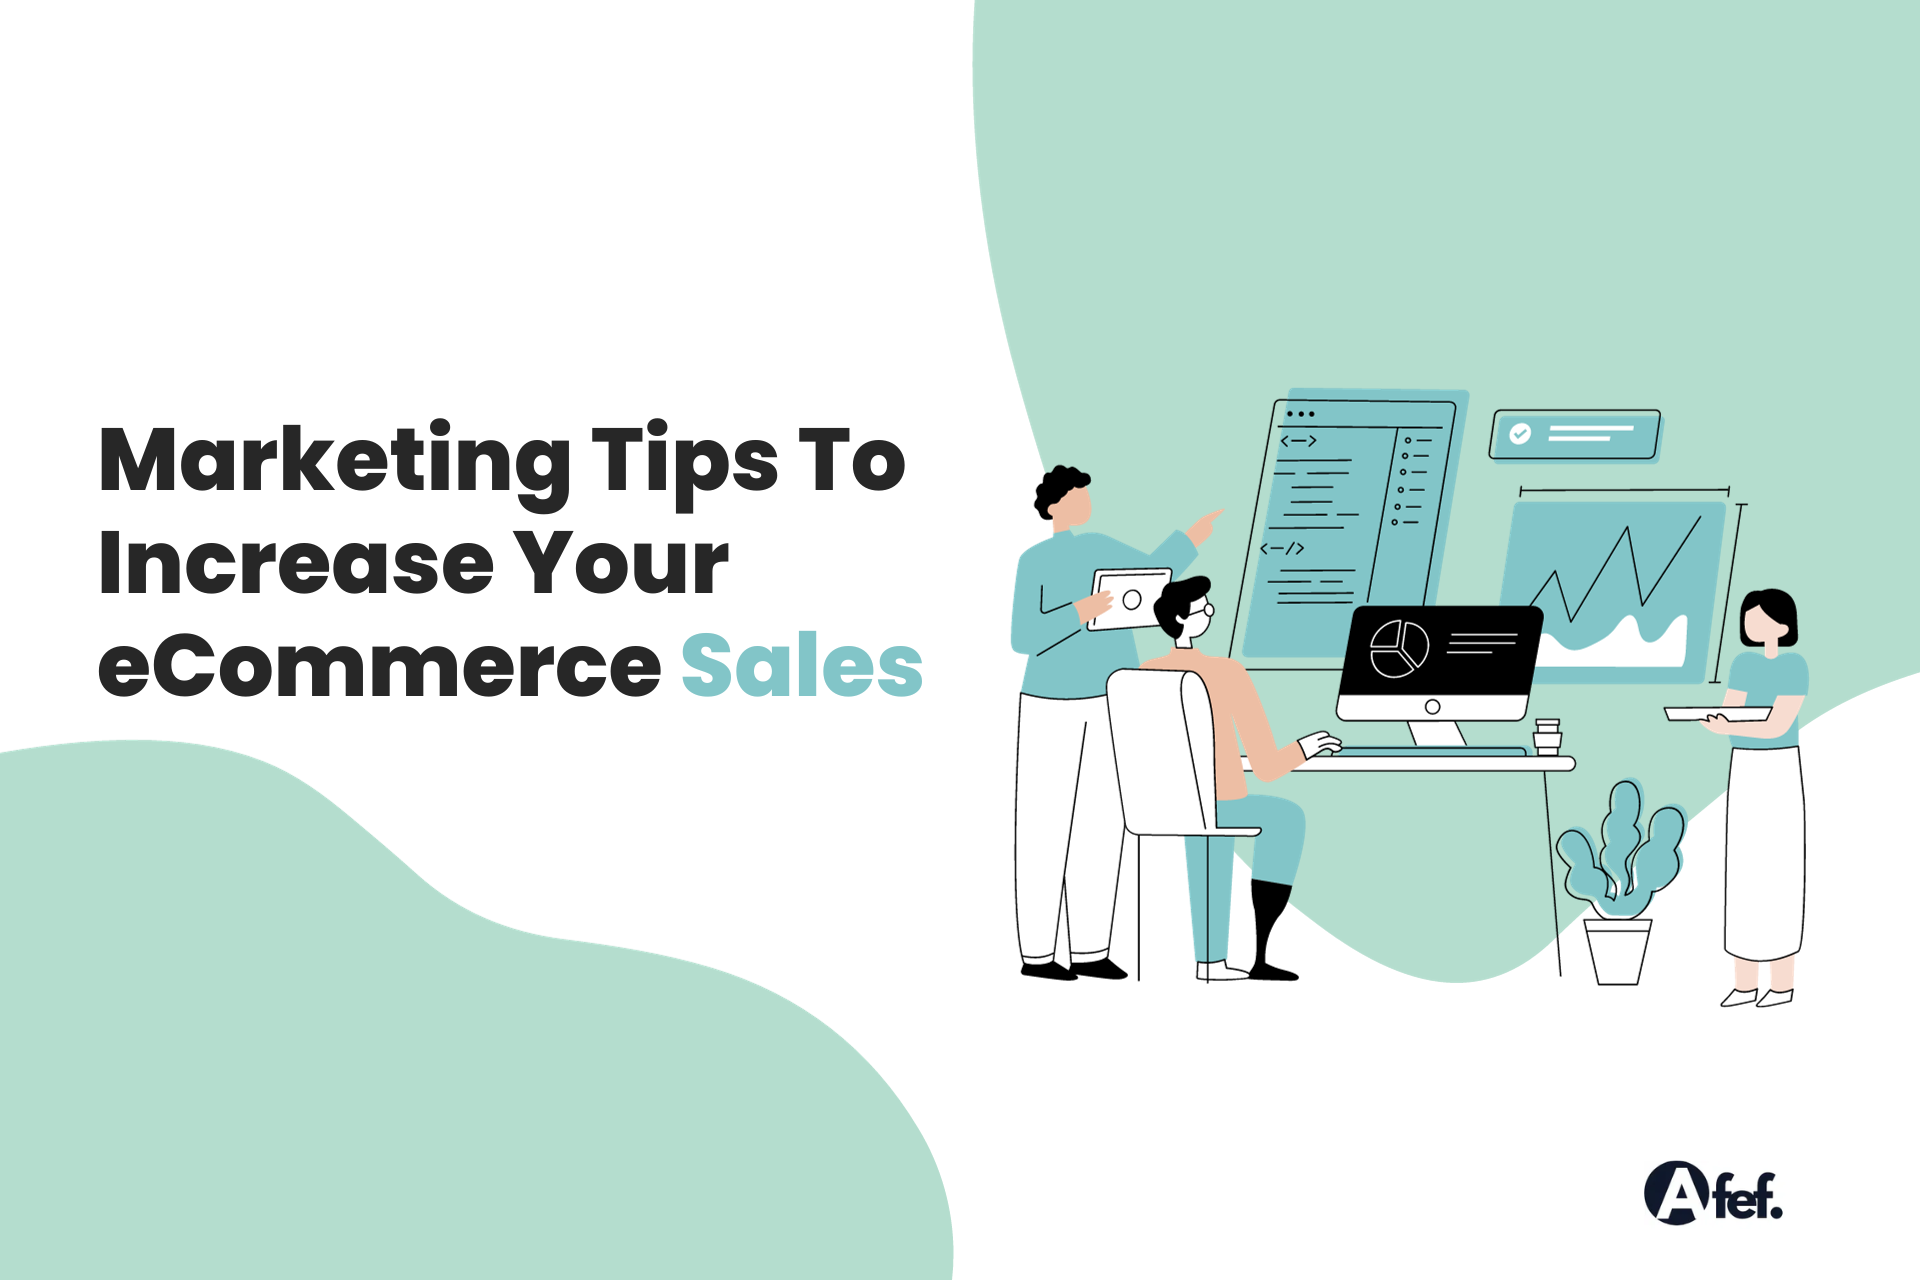 Marketing Tips To Increase Your eCommerce Sales